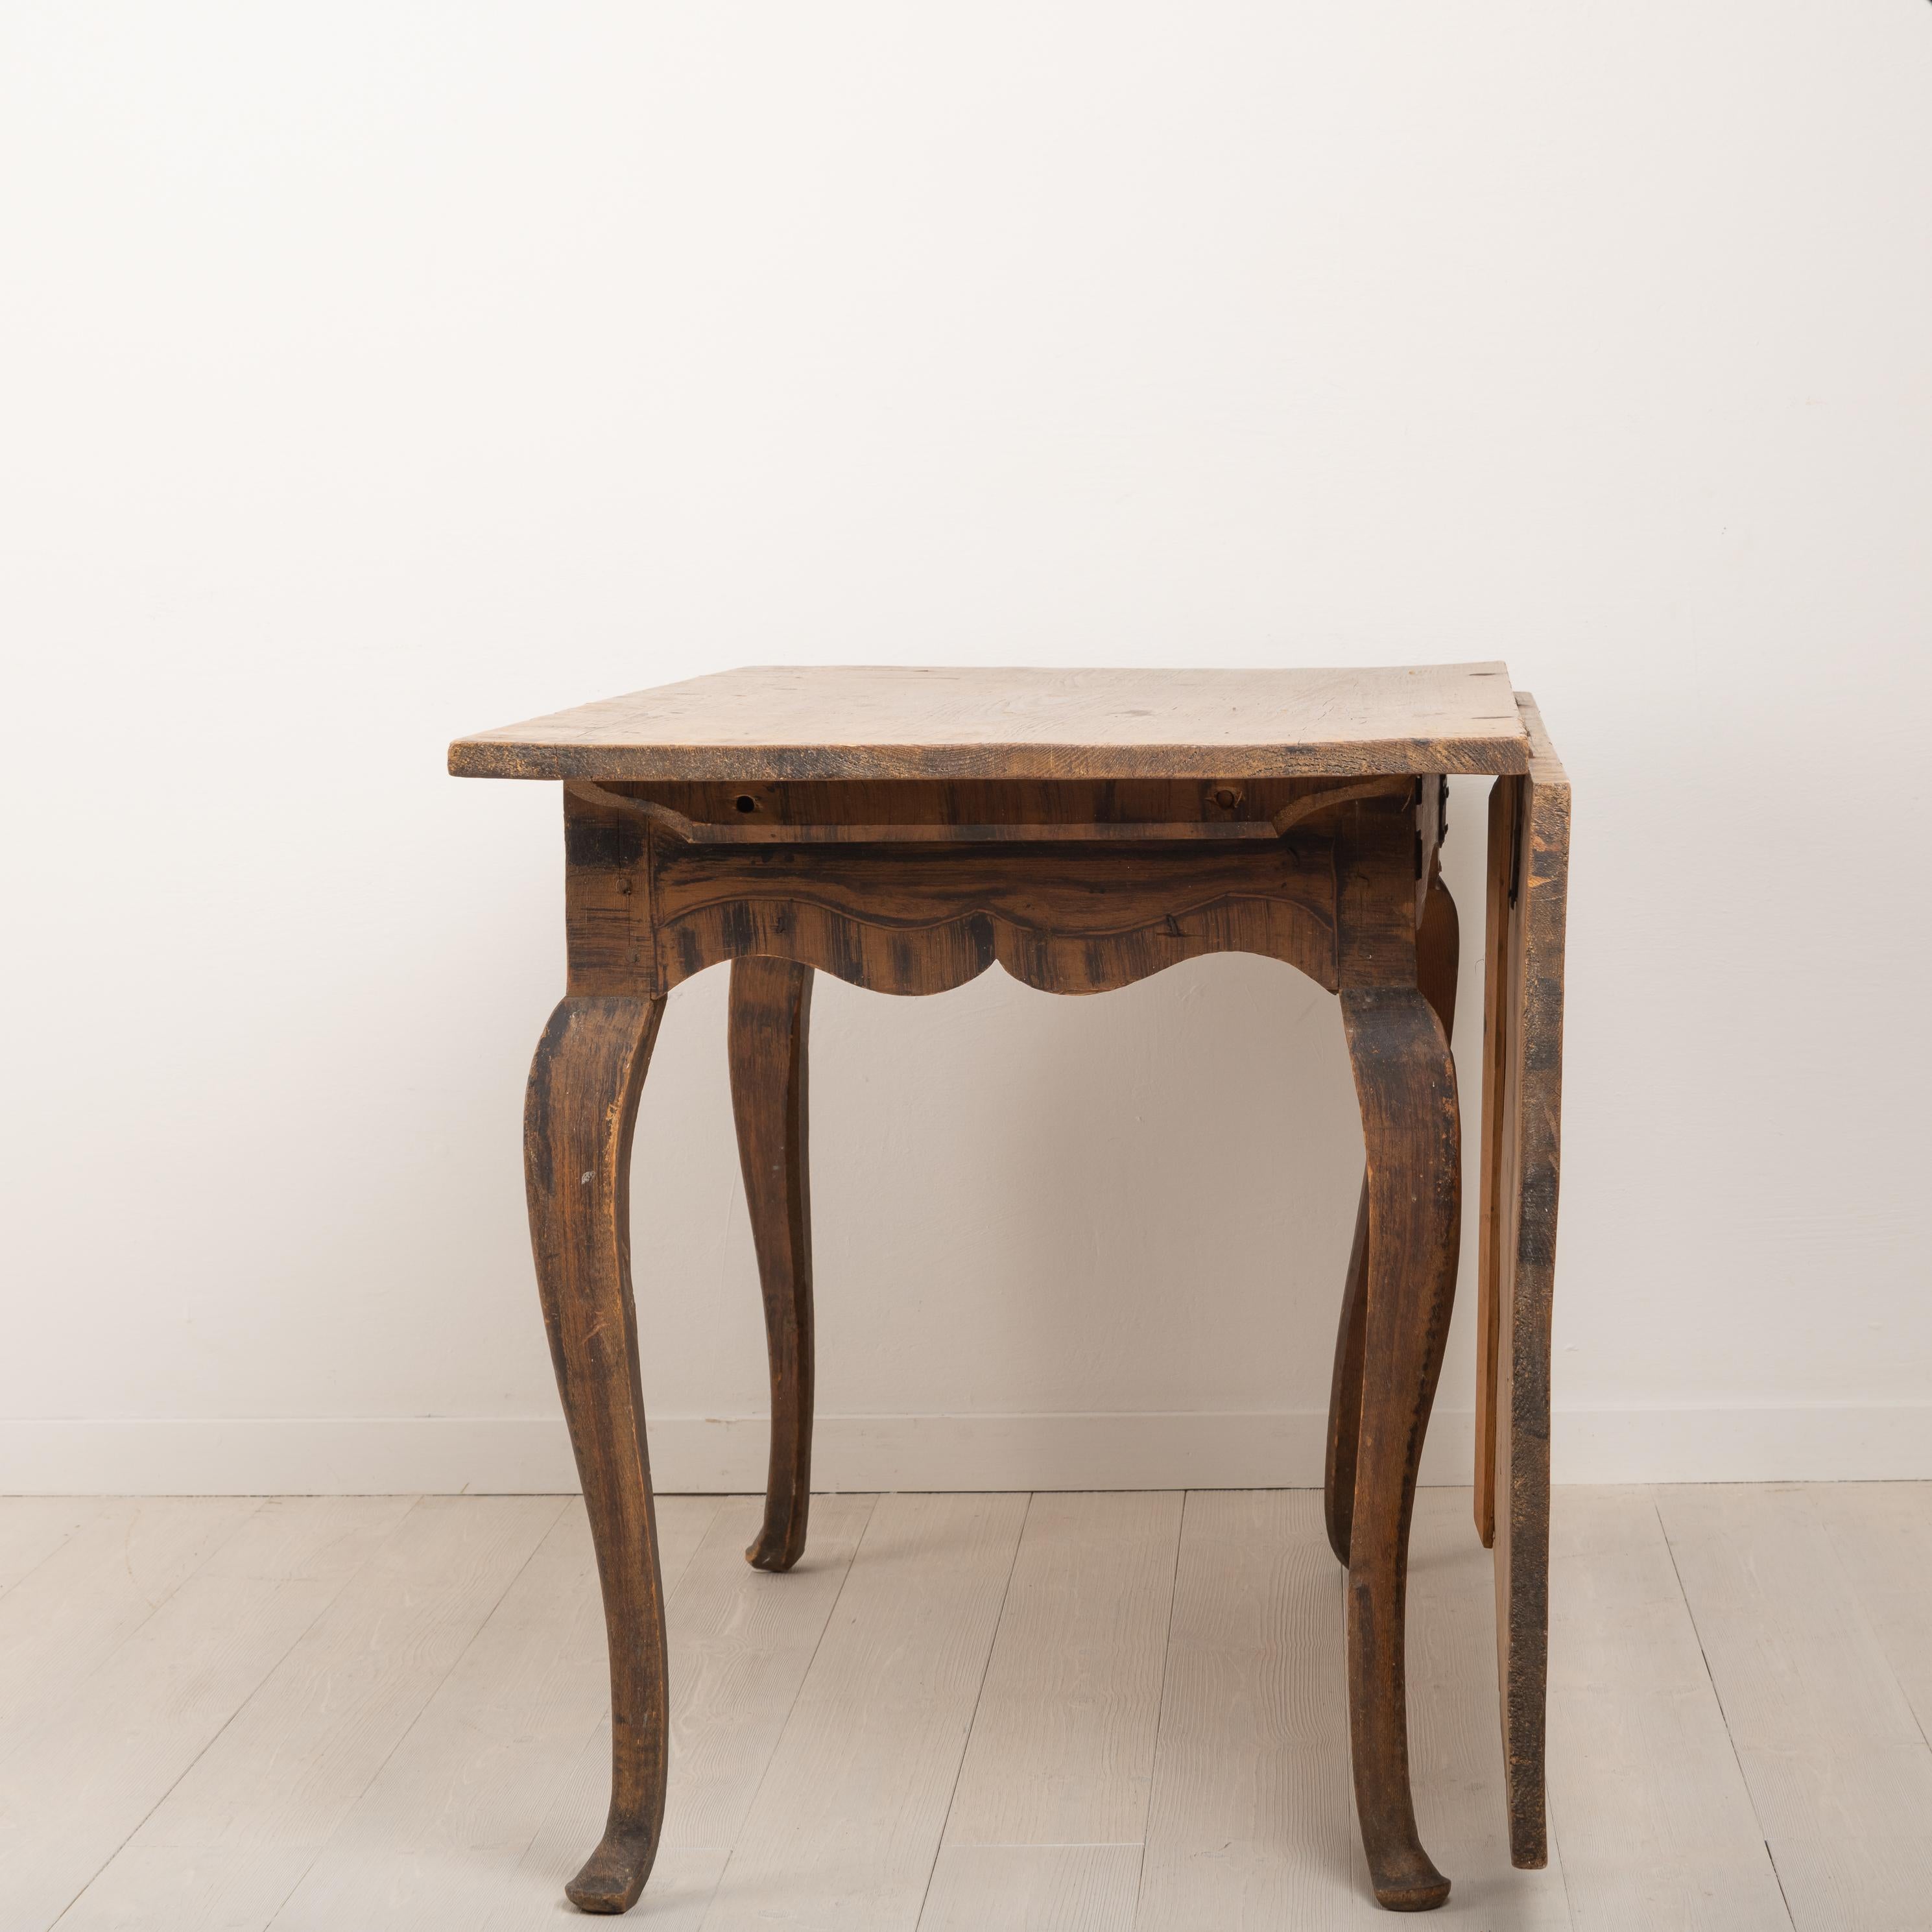 Mid-18th Century Swedish Baroque Drop-Leaf Table For Sale 1